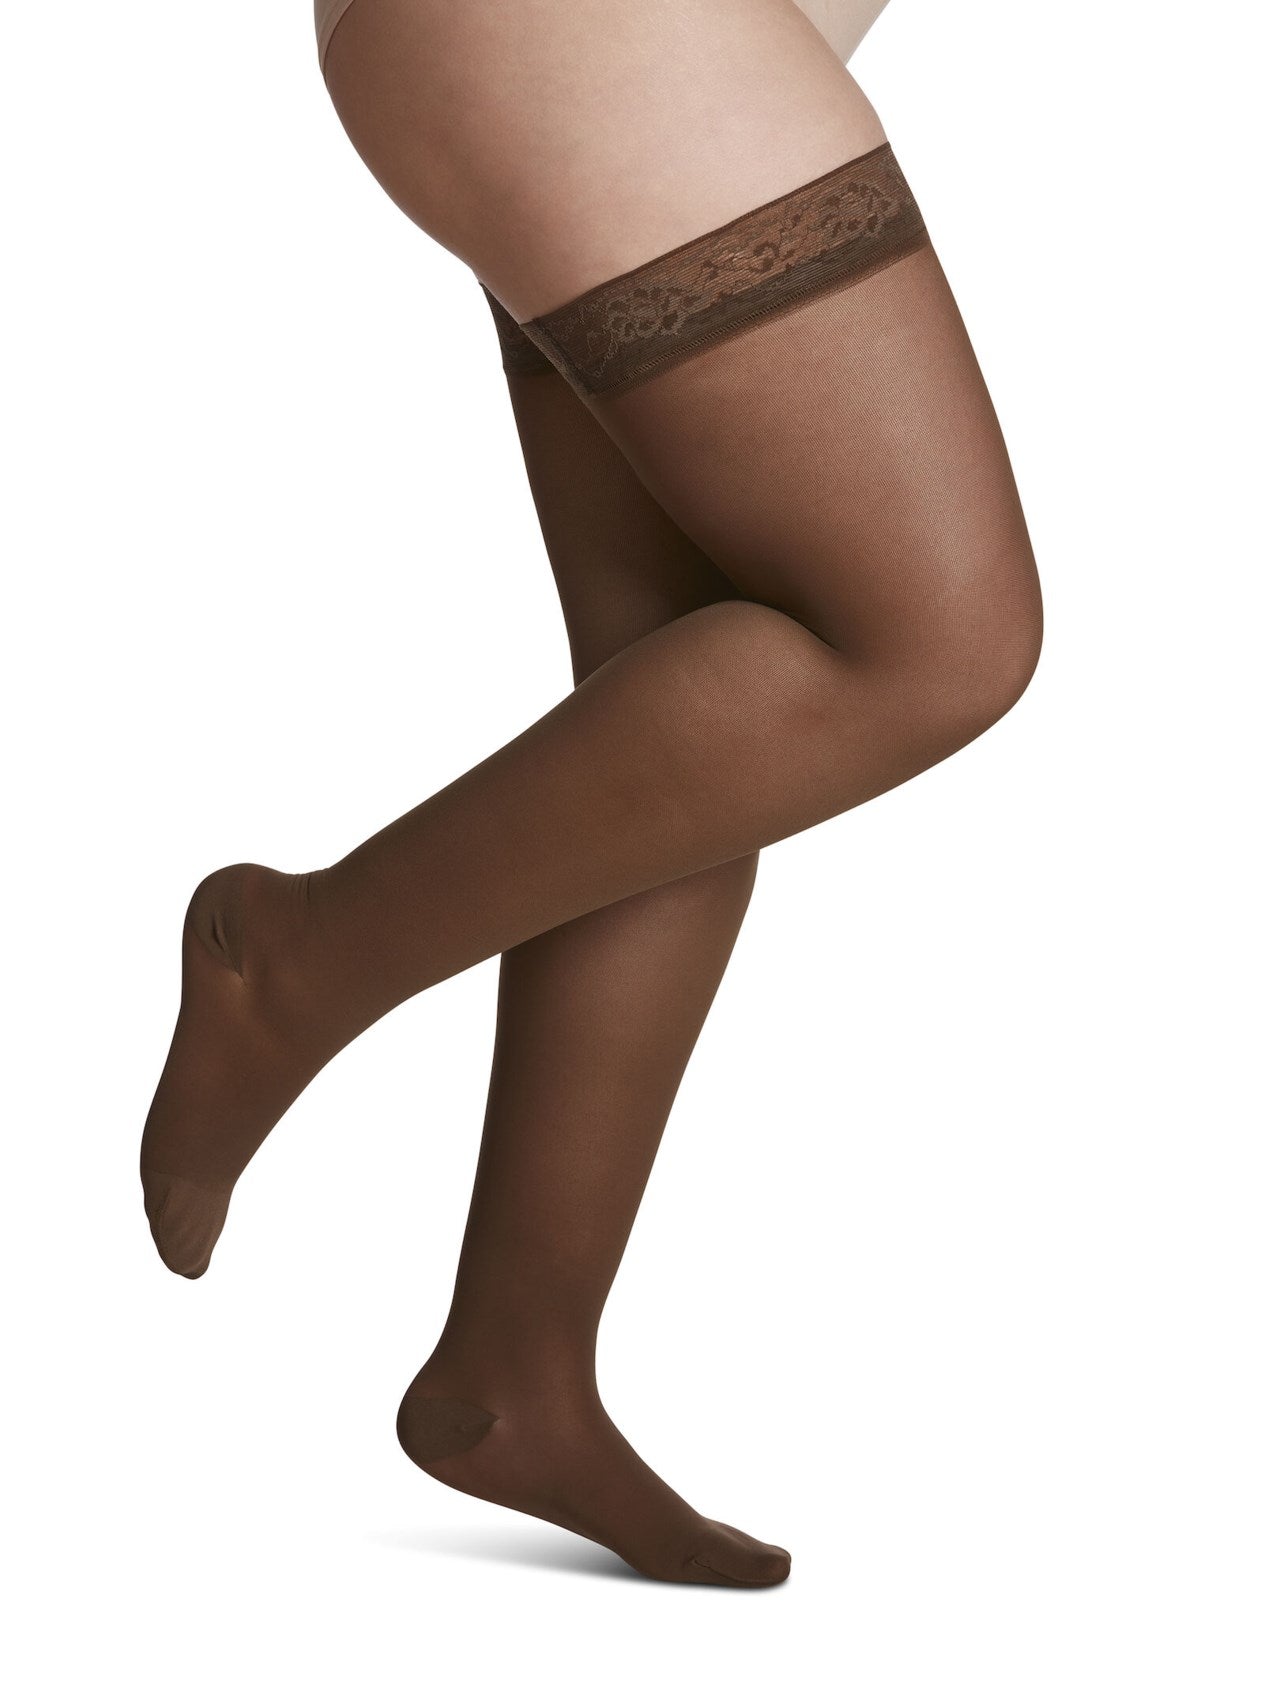 Pantyhoses and stockings at HOSIERIA Online-Shop